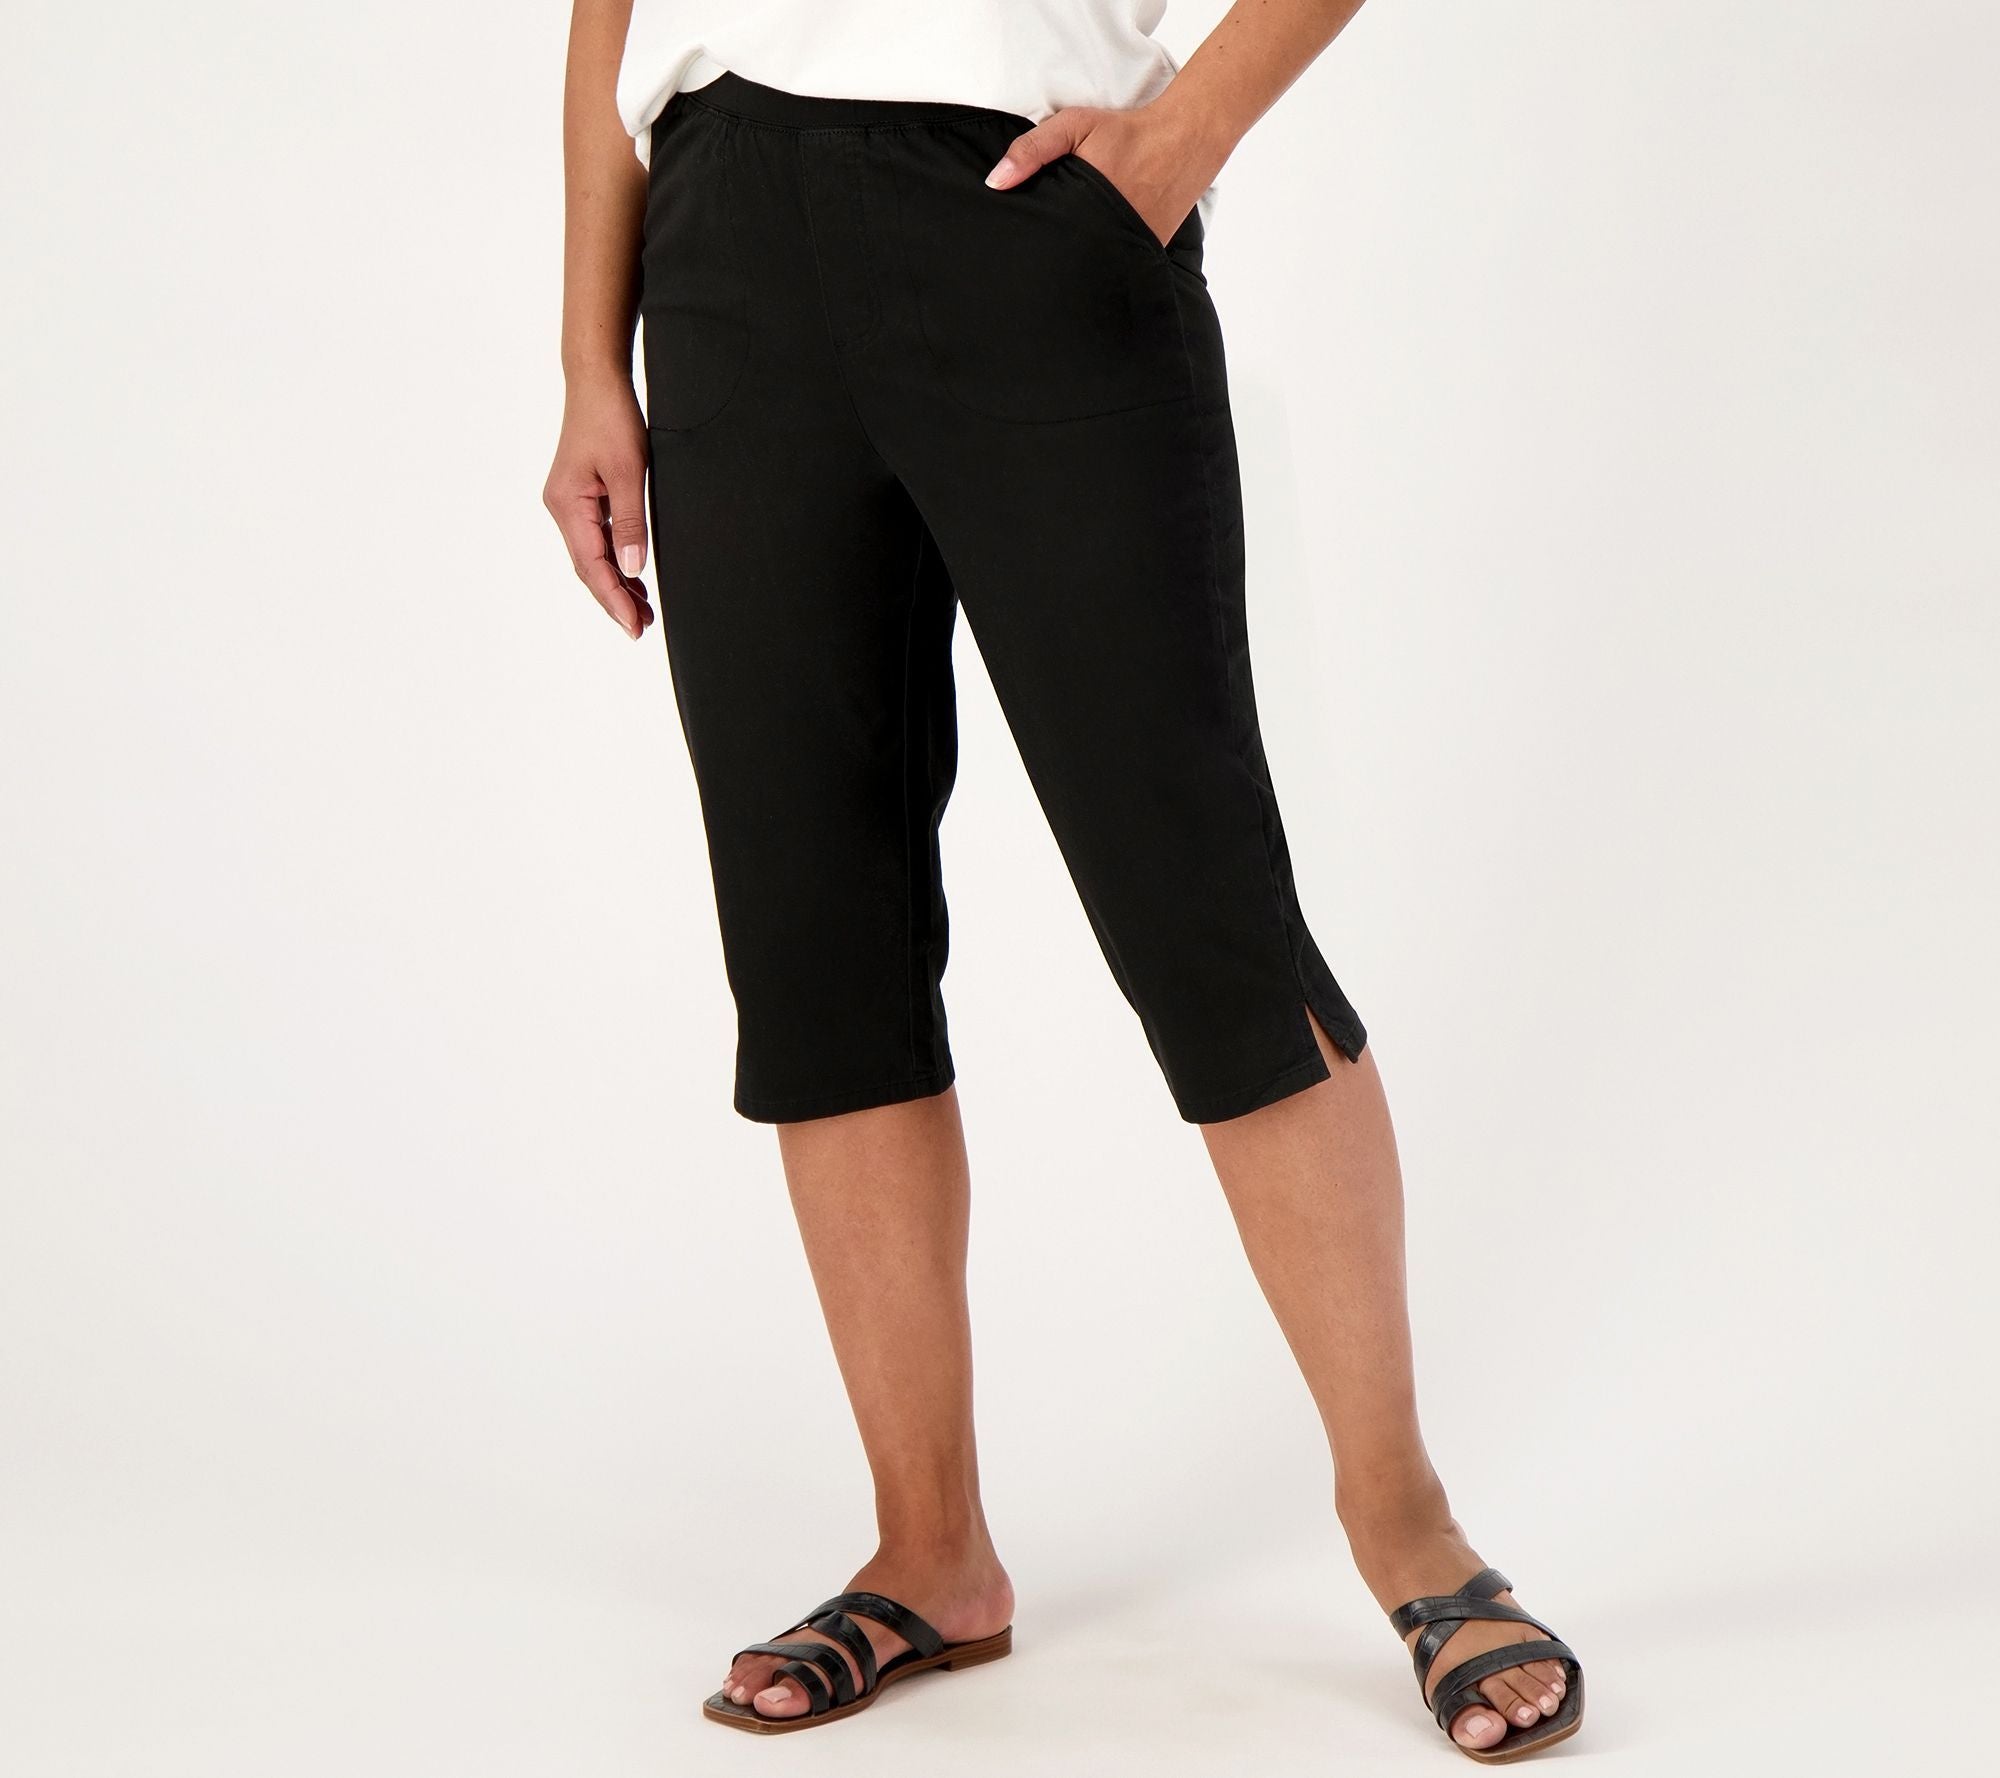 EasyWear Twill Tall Relaxed Pull-On Skimmer Pants